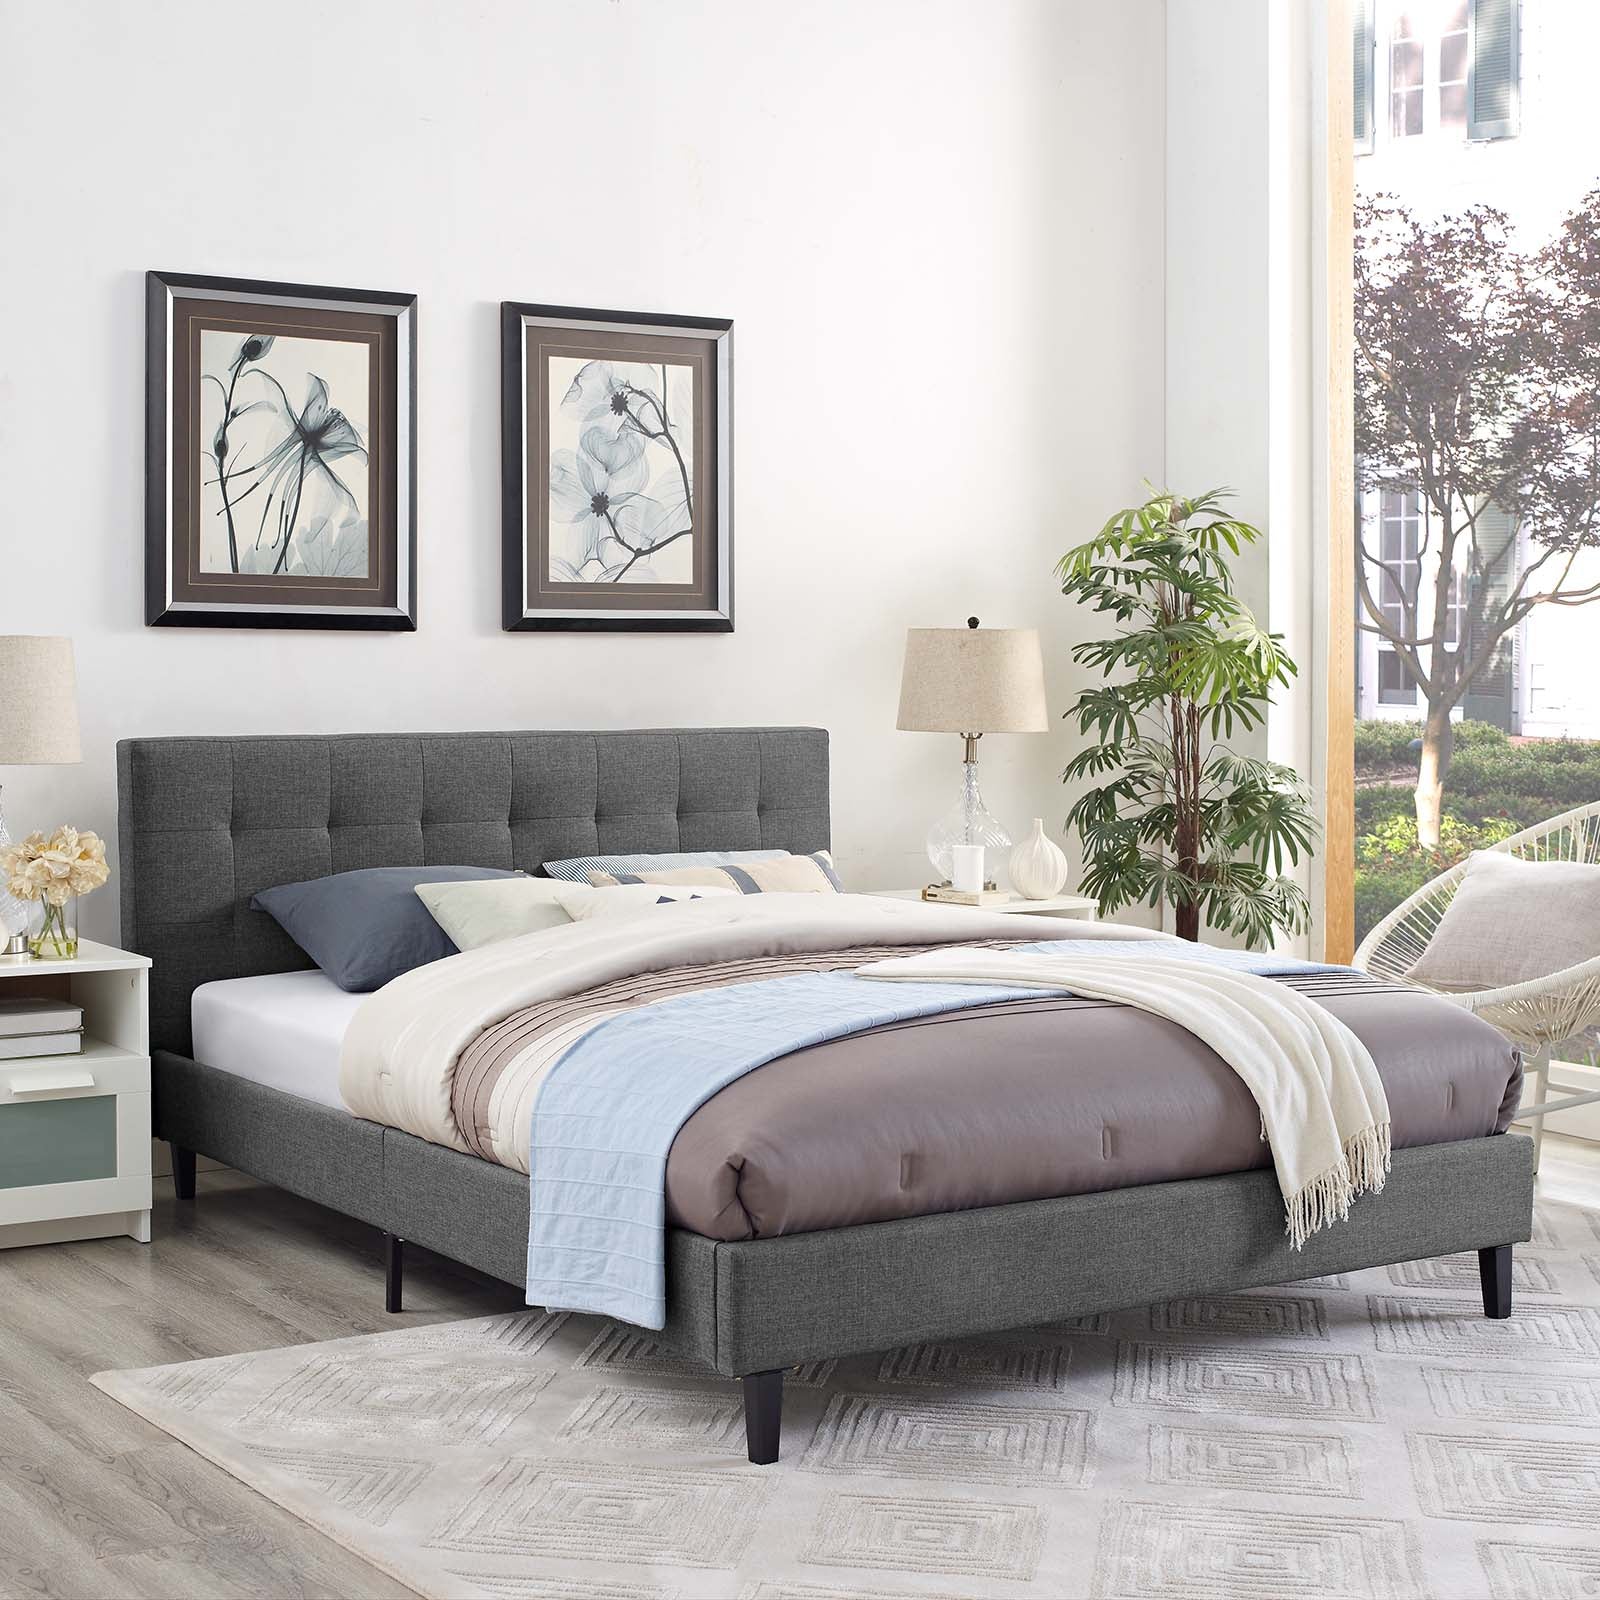 Modway Beds - Linnea Full Bed Gray